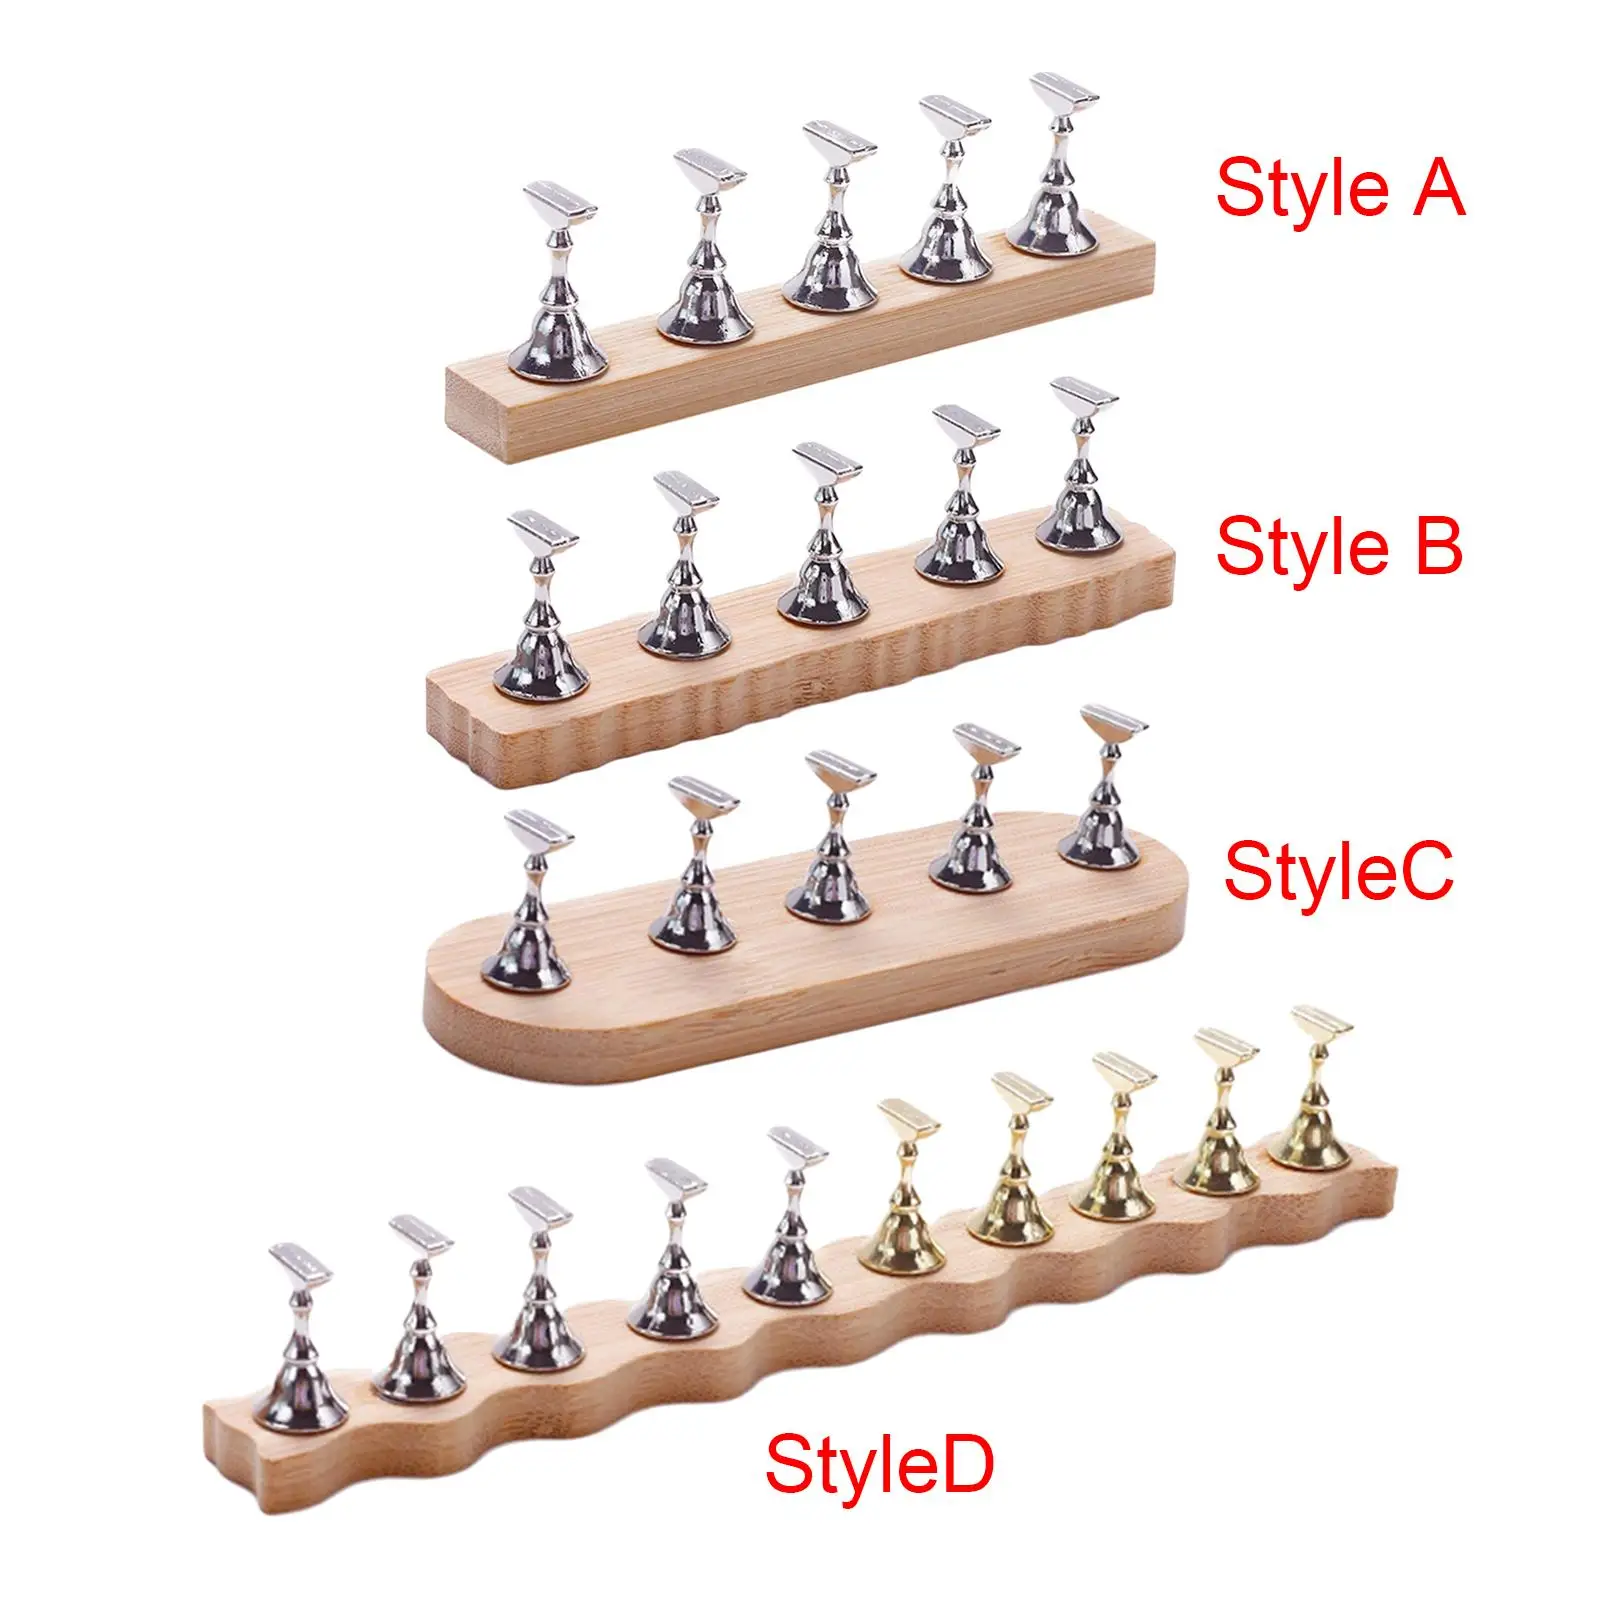 Nail Stand Nail Art Supplies Nail Showing Shelf Nail Practice Base for Home Salon DIY Makeup Training Practice Manicurists